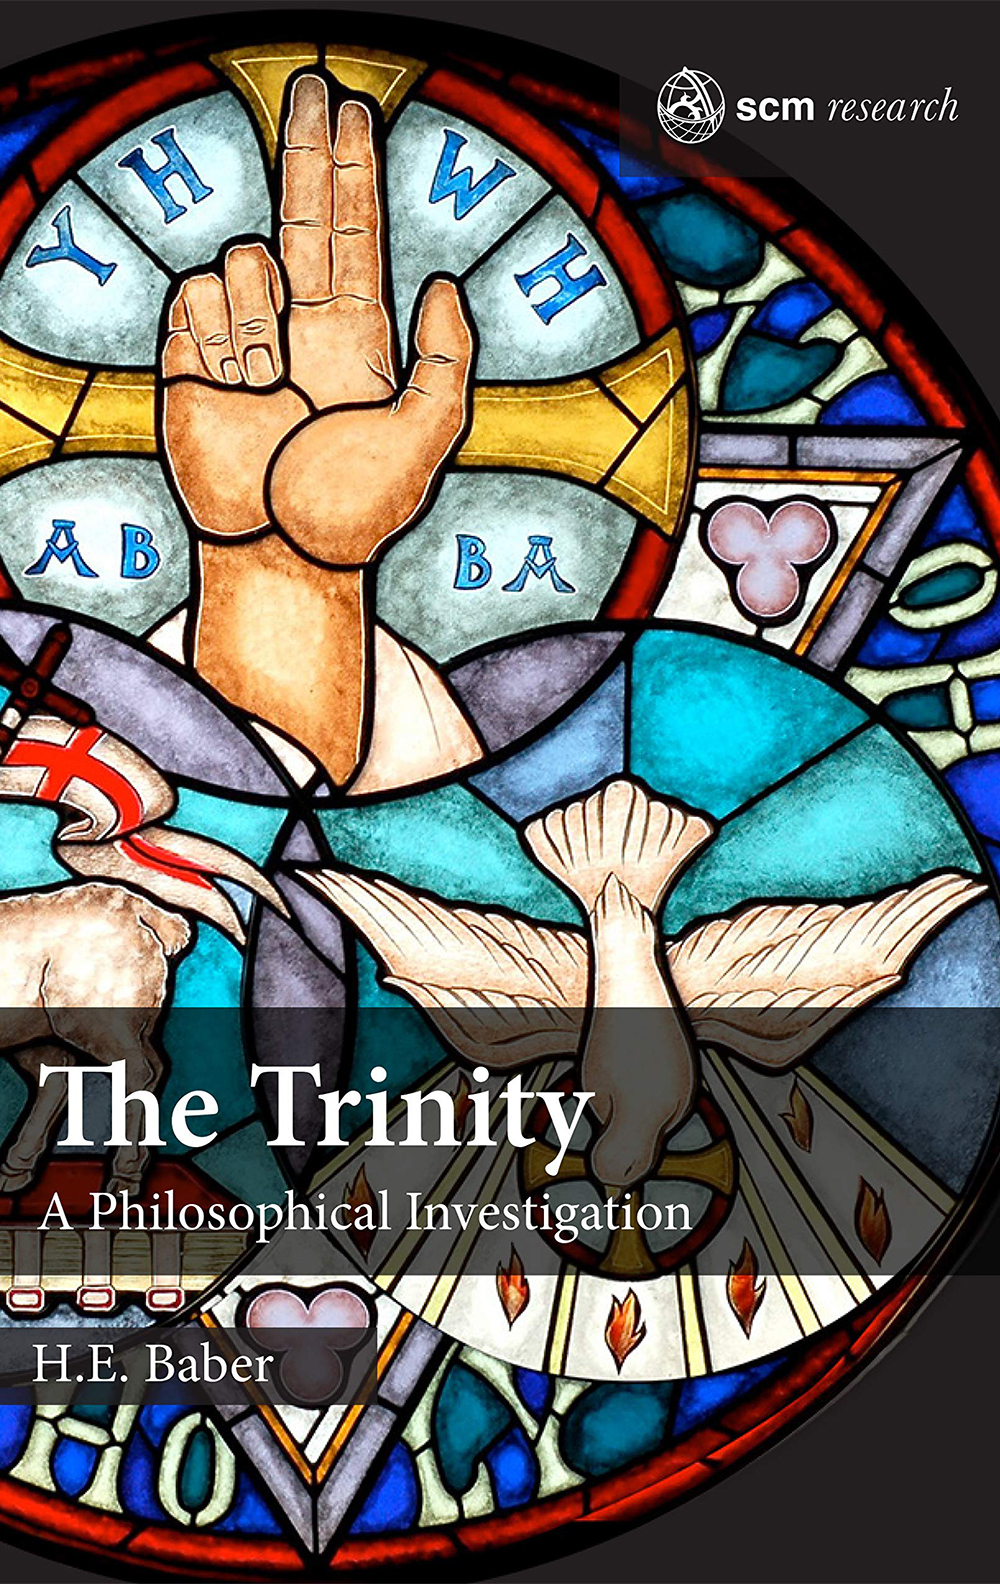 The Trinity: a Philosophical Investigation